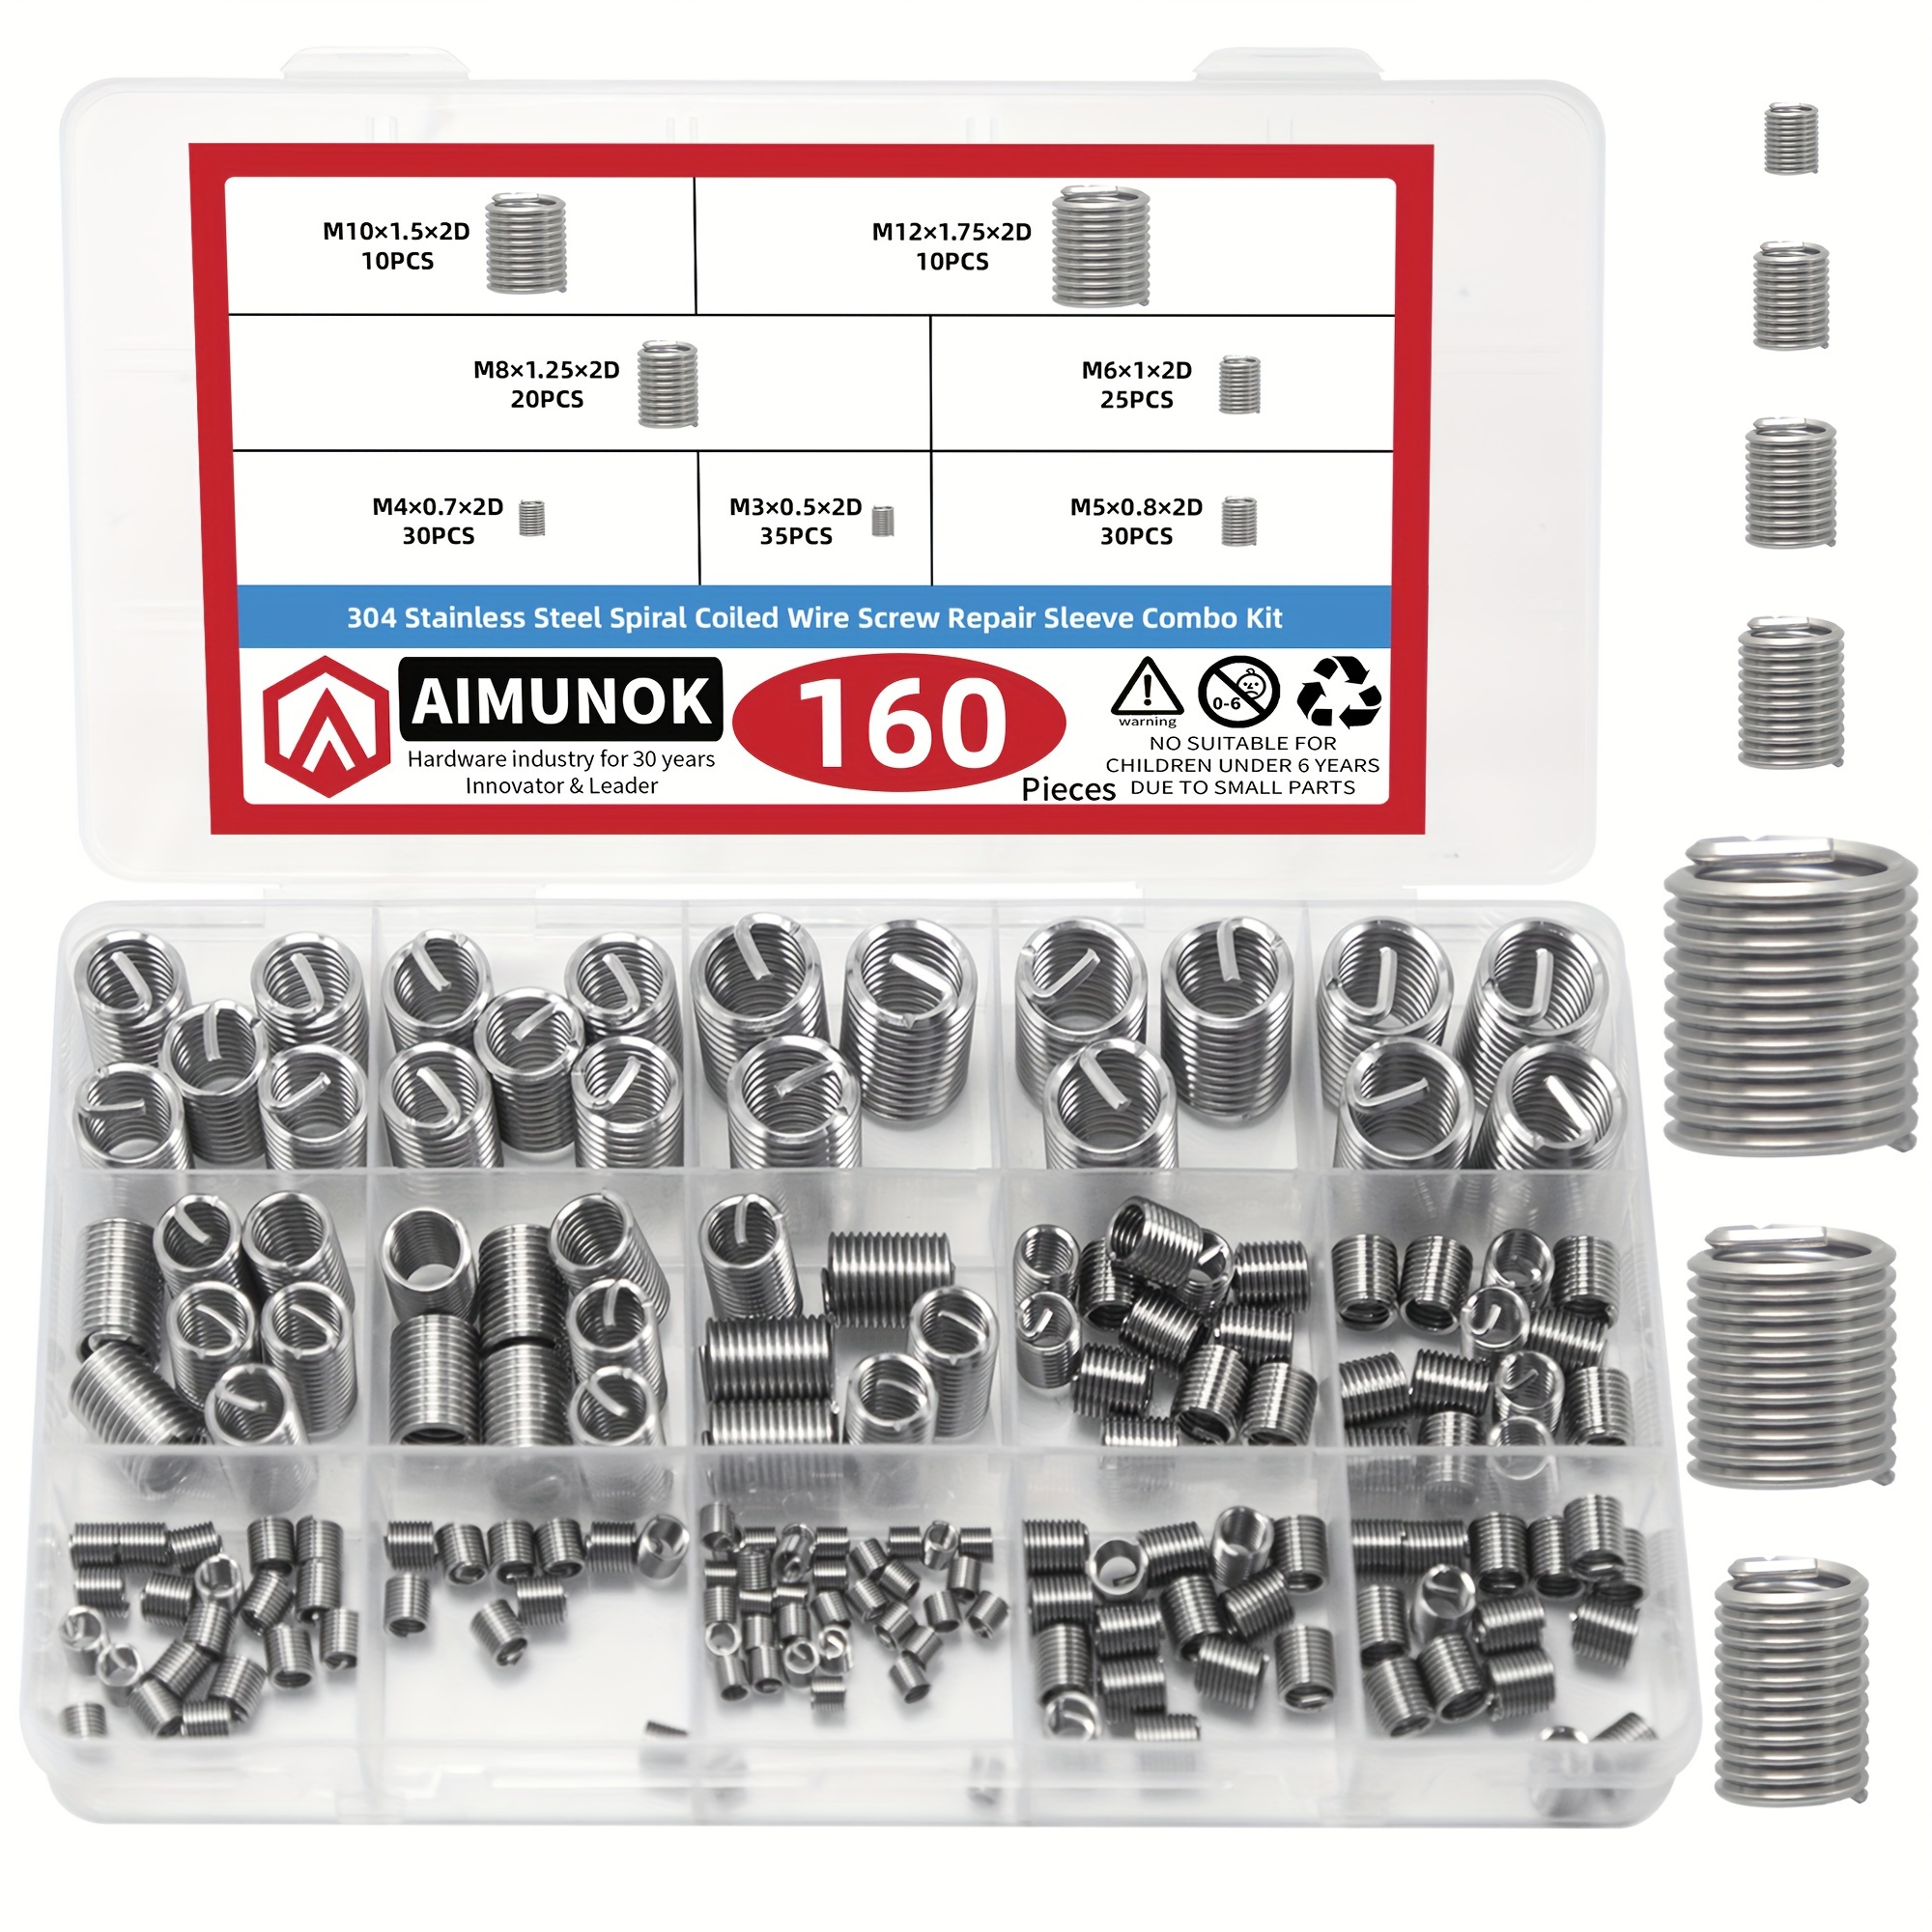 

160pcs Wire Inserts Screws Sleeve Assortment Kit, 304 Stainless Steel Metric M3 M4 M5 M6 M8 M10 M12 Wire Thread Inserts Helical Type Coiled Wire Screw Repair Sleeve For Automotive Repairs